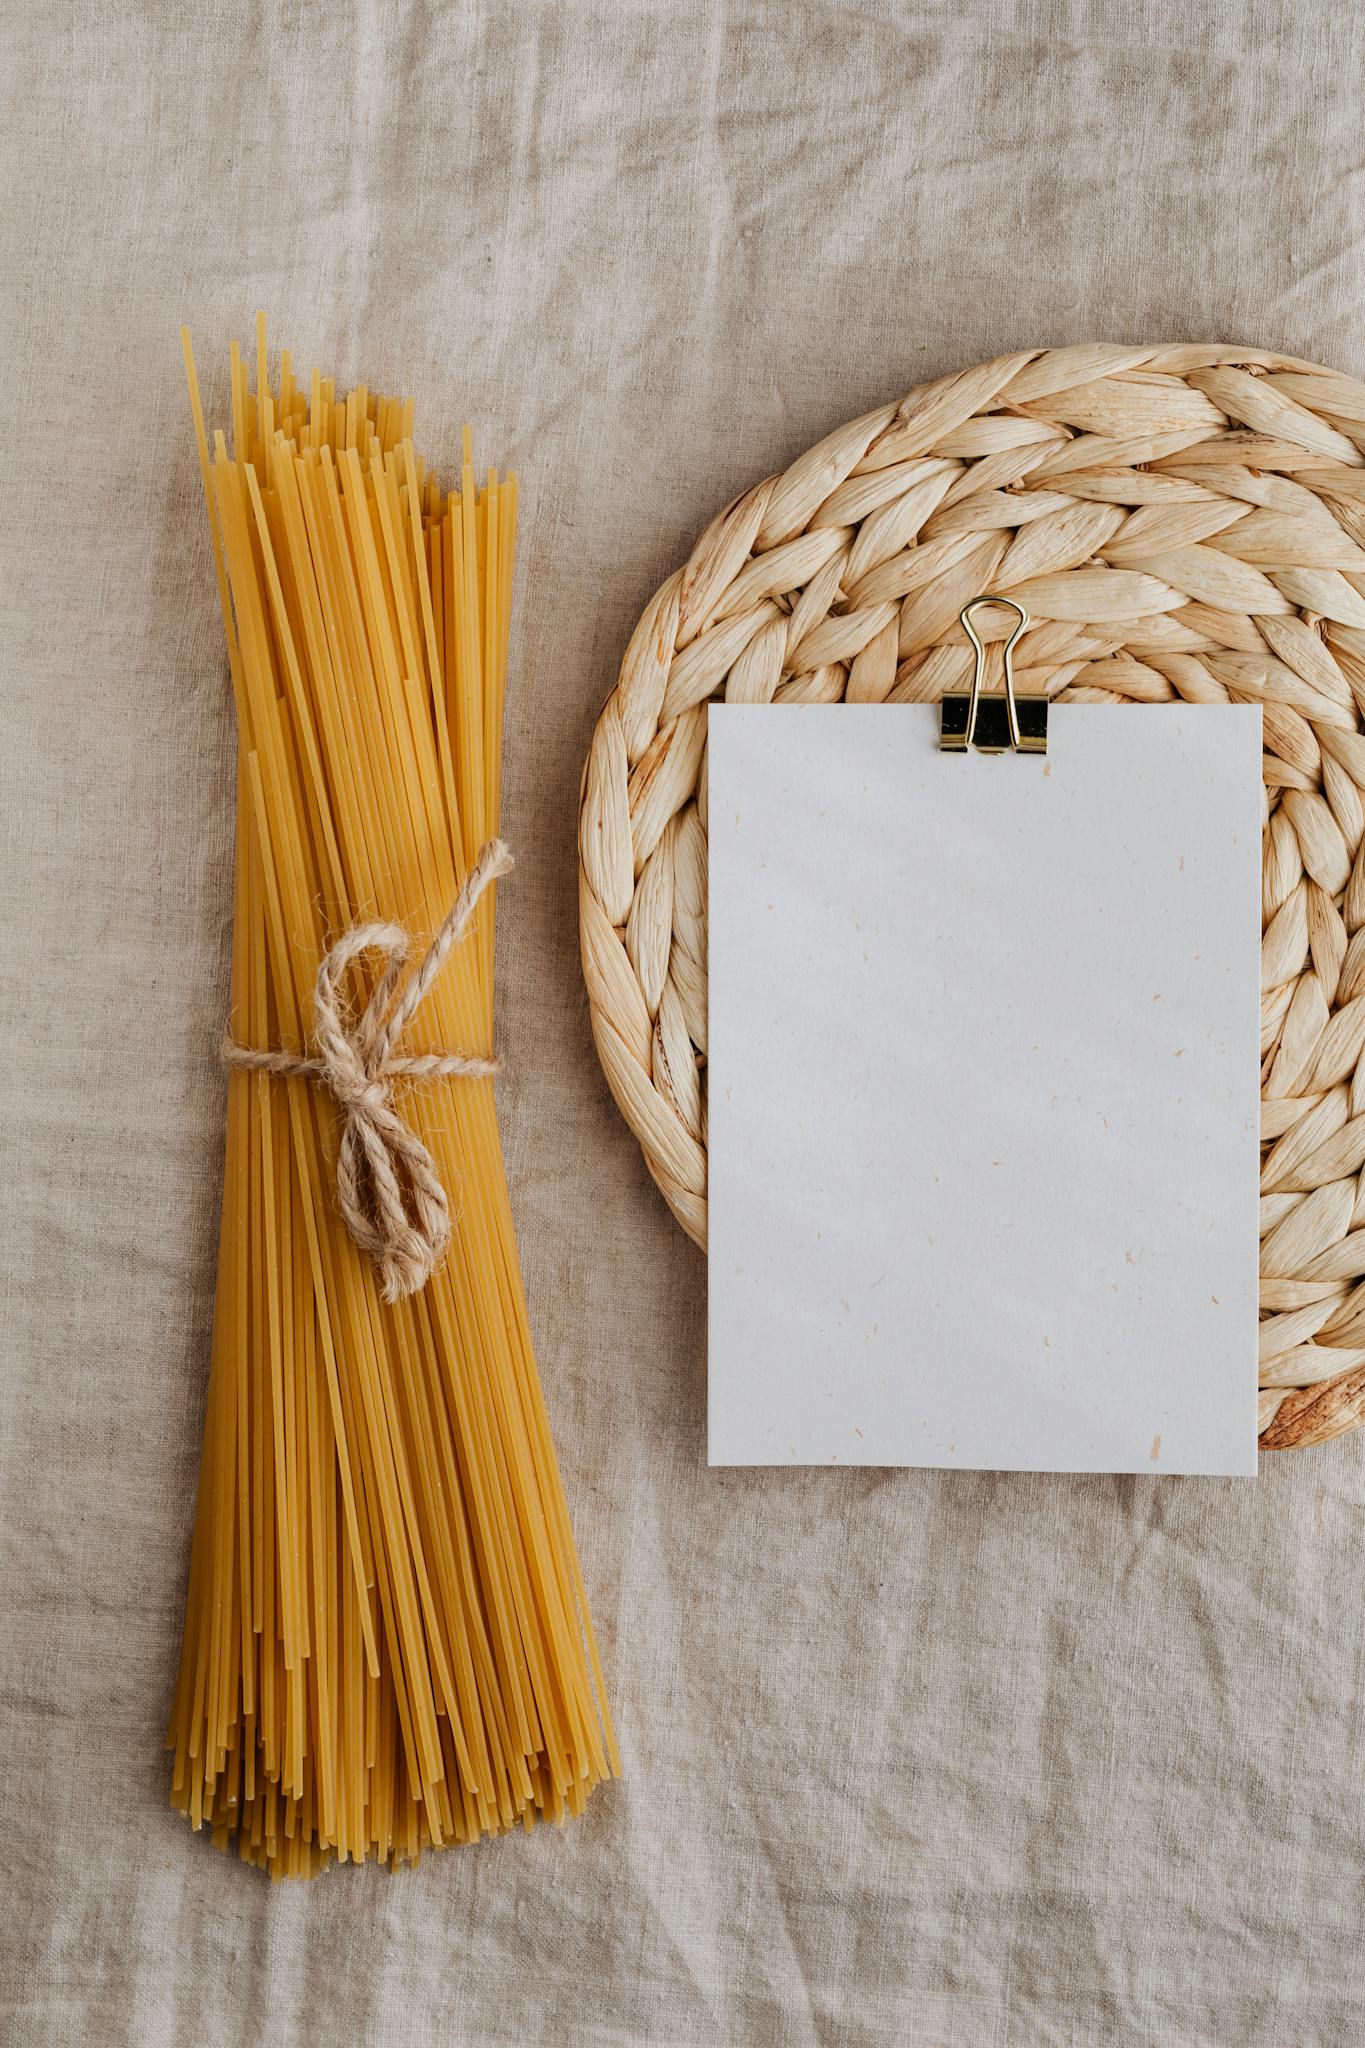 Composition with empty clipboard and spaghetti on kitchen table